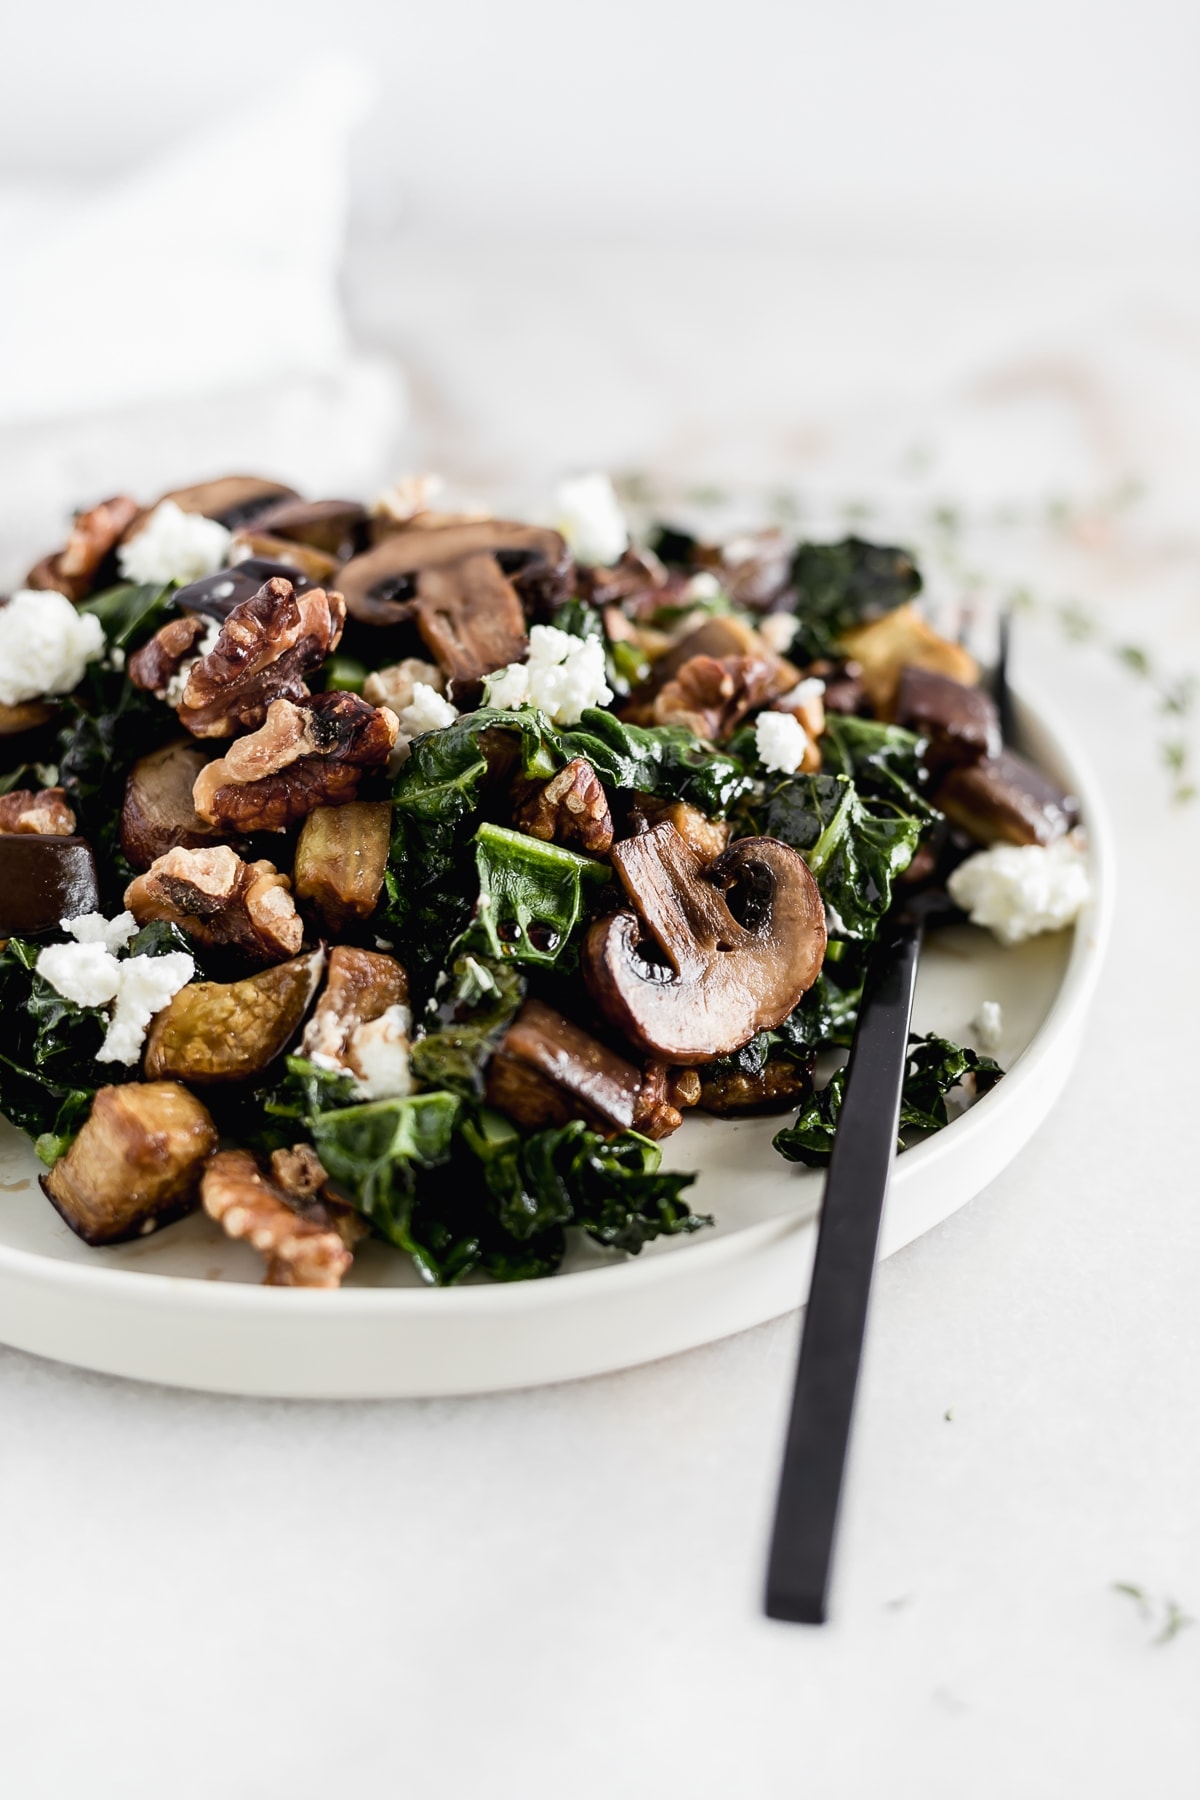 A delicious warm eggplant, mushroom and kale salad with tangy goat cheese, walnuts and balsamic vinaigrette. It's the perfect side dish for cold weather! (#glutenfree, #vegetarian) | #kalesalad #fall #sidedish | via livelytable.com